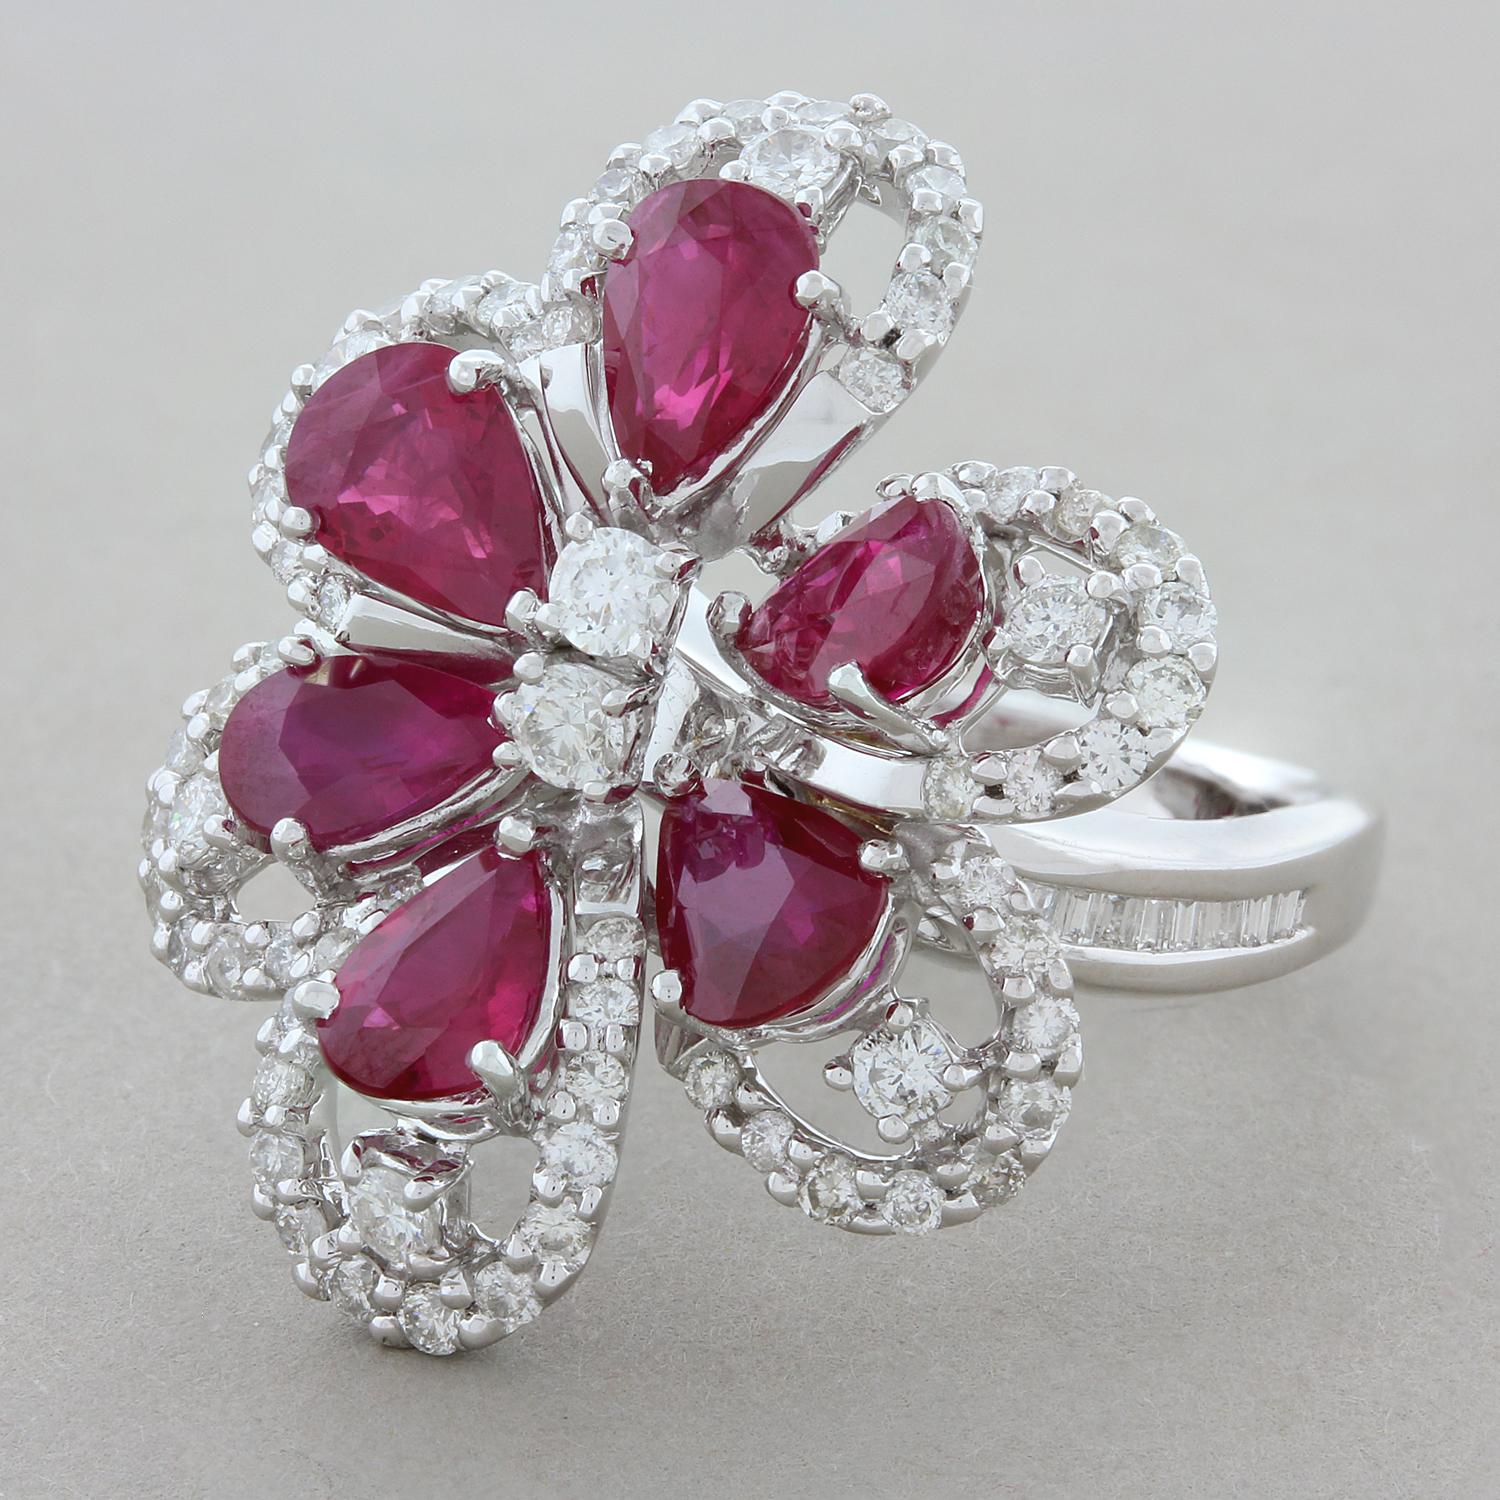 This free form flower ring features six vivid red rubies weighing a total of 4.88 carats. The pear shape rubies are accented by 1.76 carats of round brilliant cut diamonds with baguette cut diamonds channel set on the shoulders of this 18K white